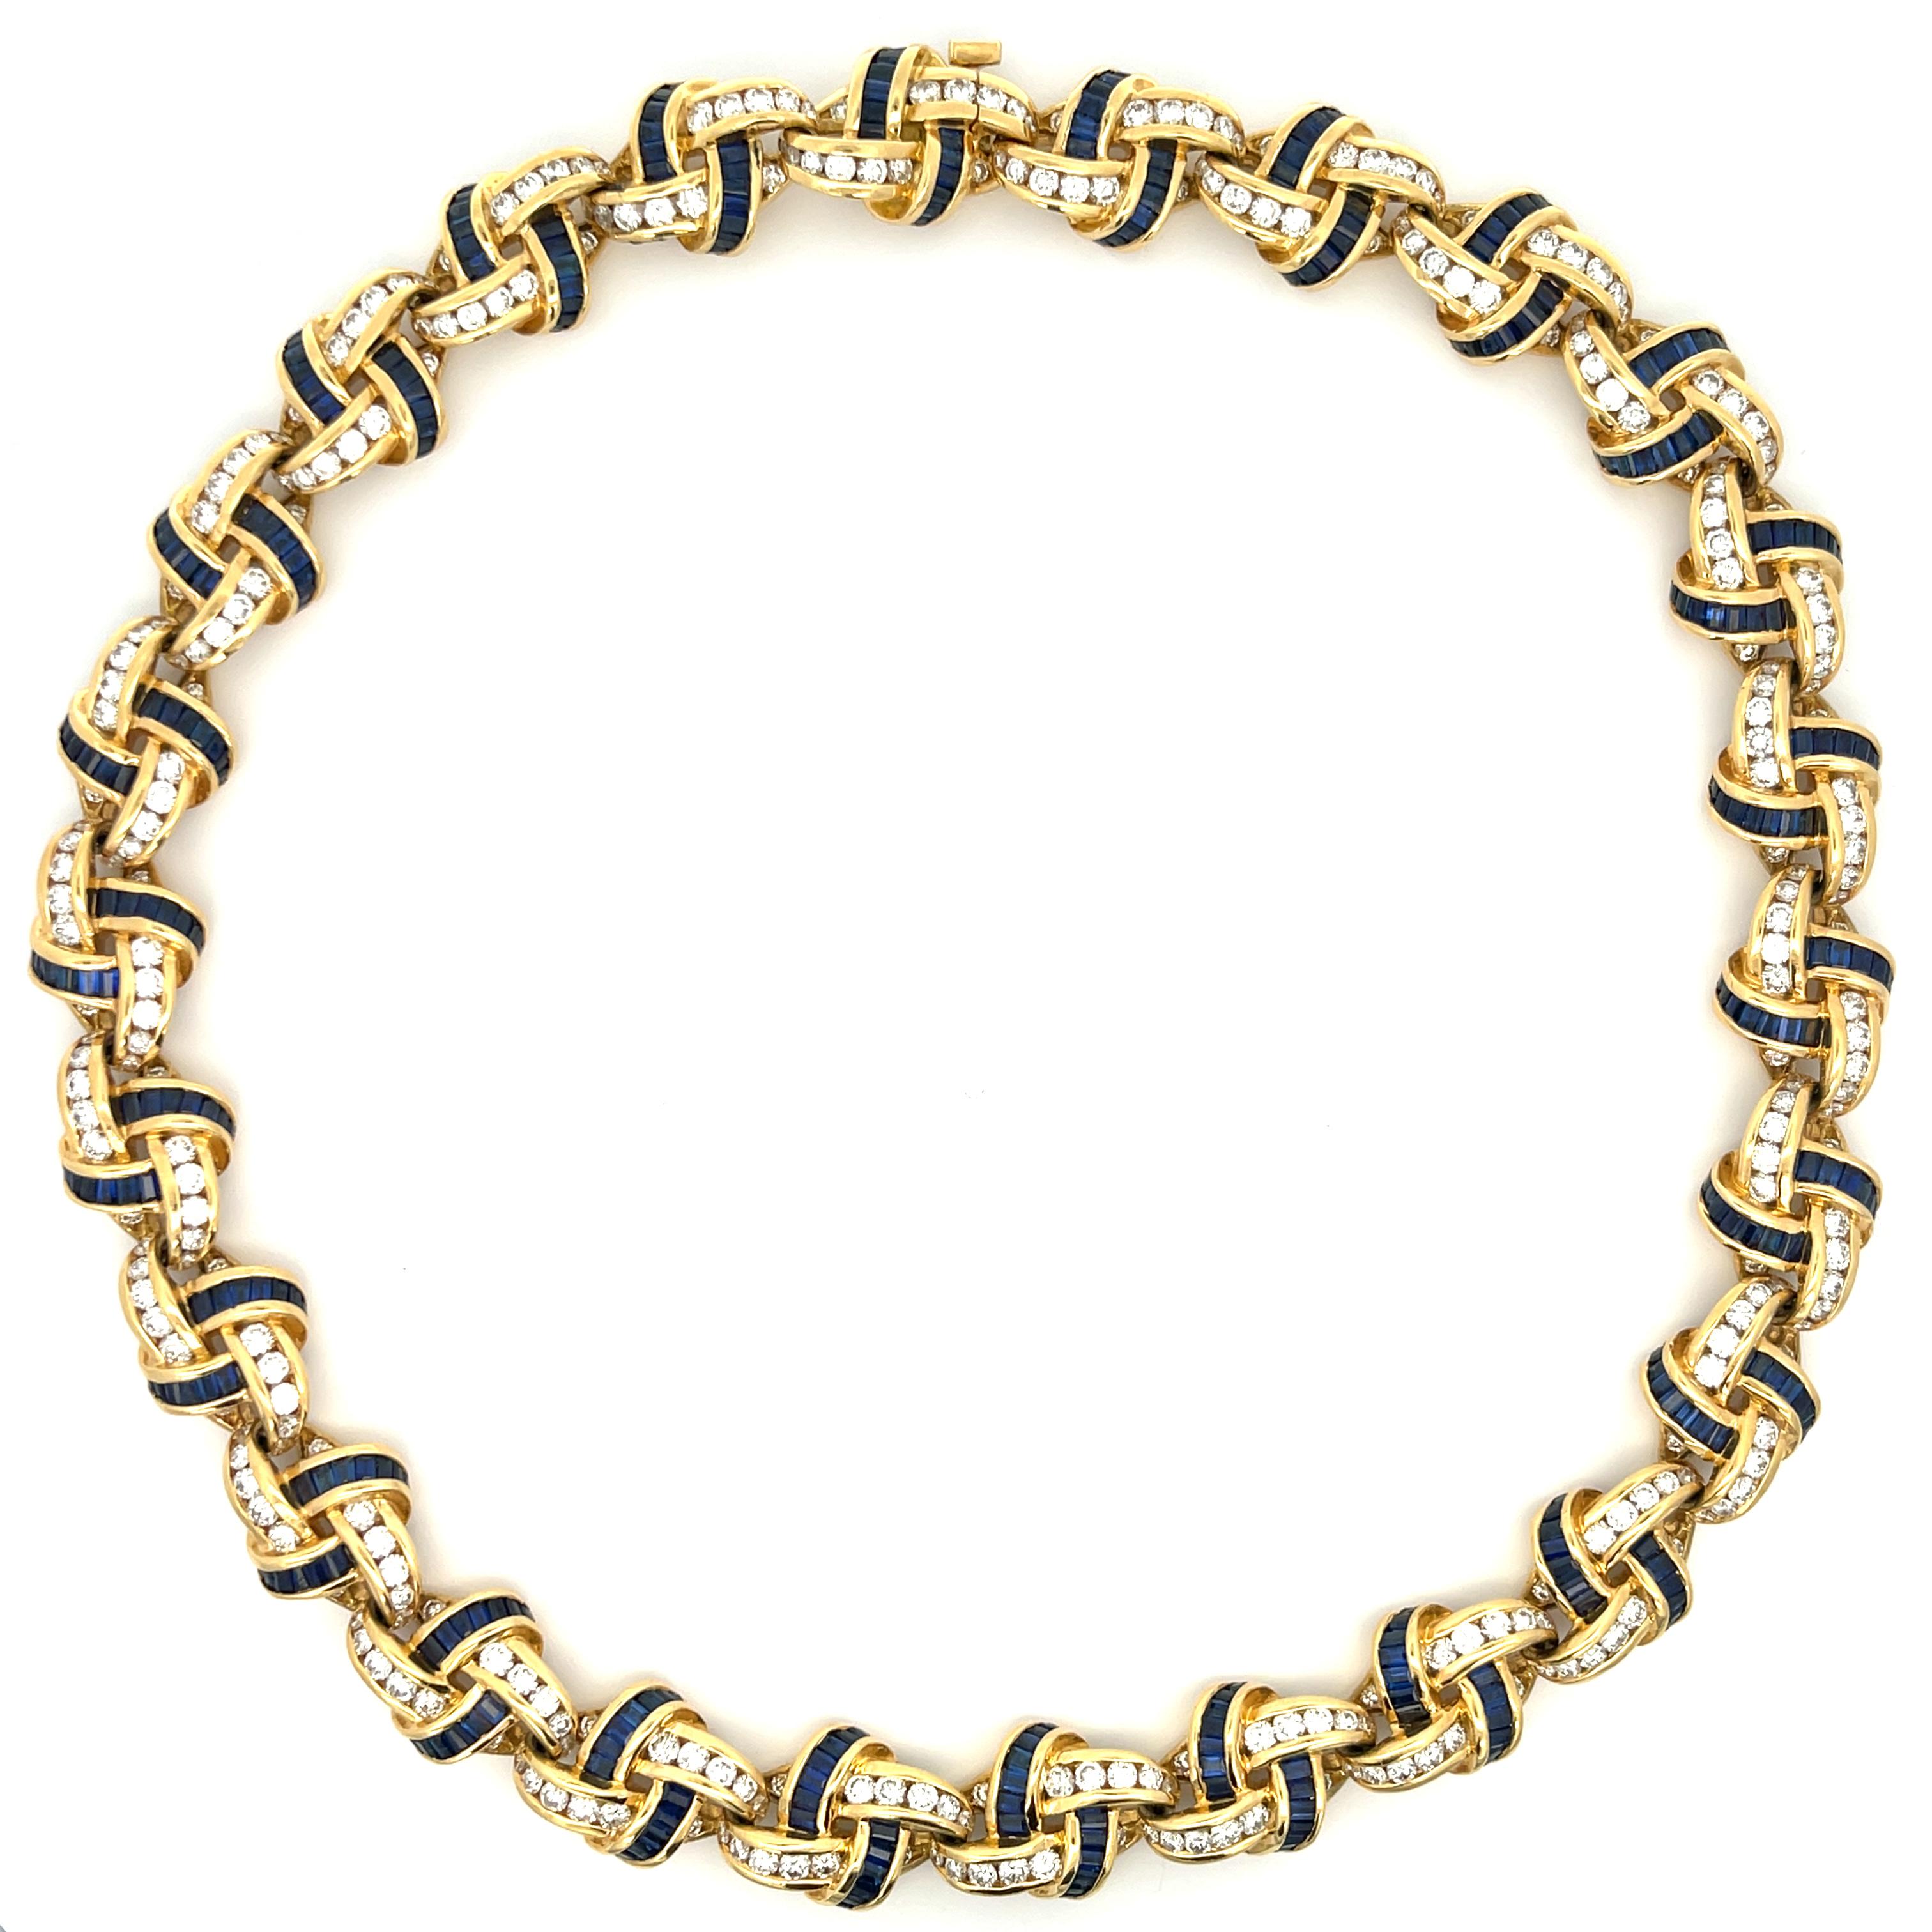 Modern Charles Krypell Yellow Gold Sapphire Diamond Necklace